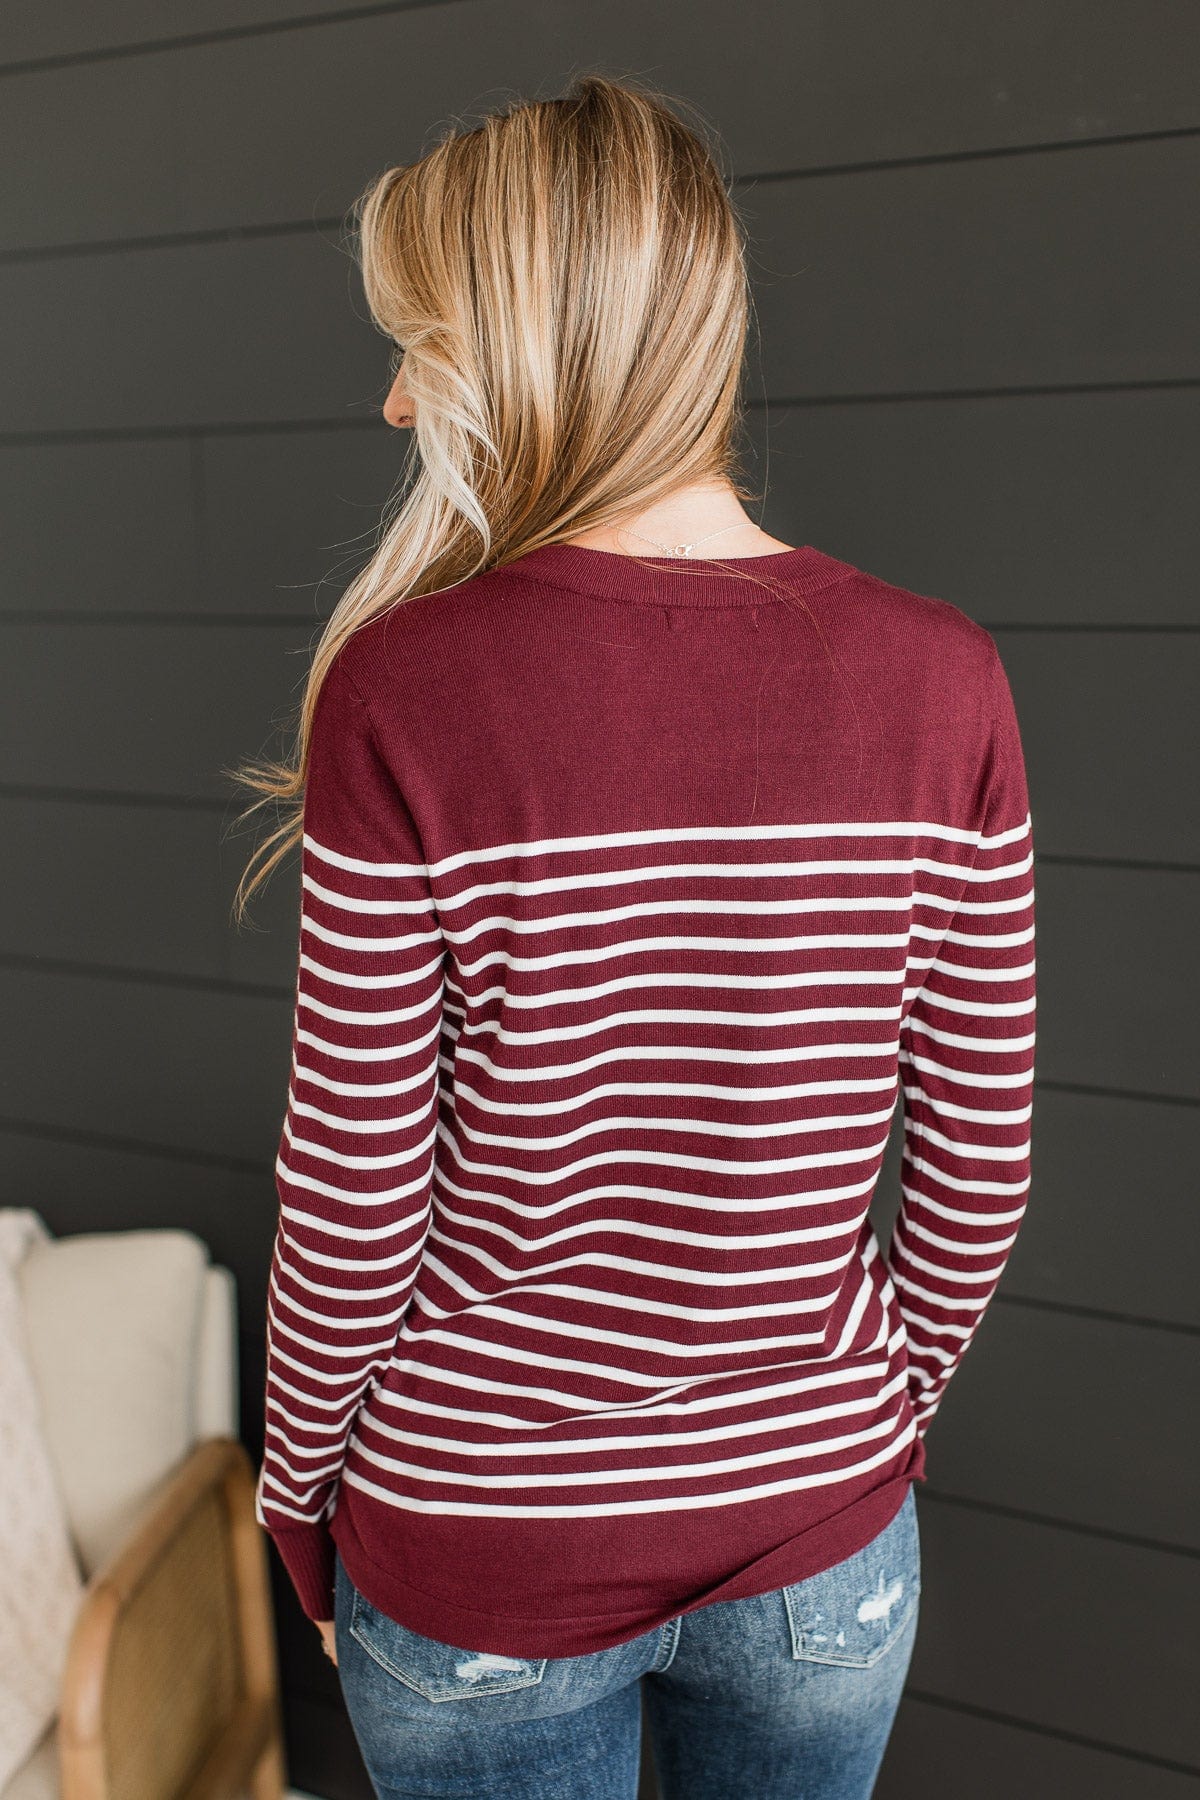 Keeping My Promise Knit Sweater- Burgundy